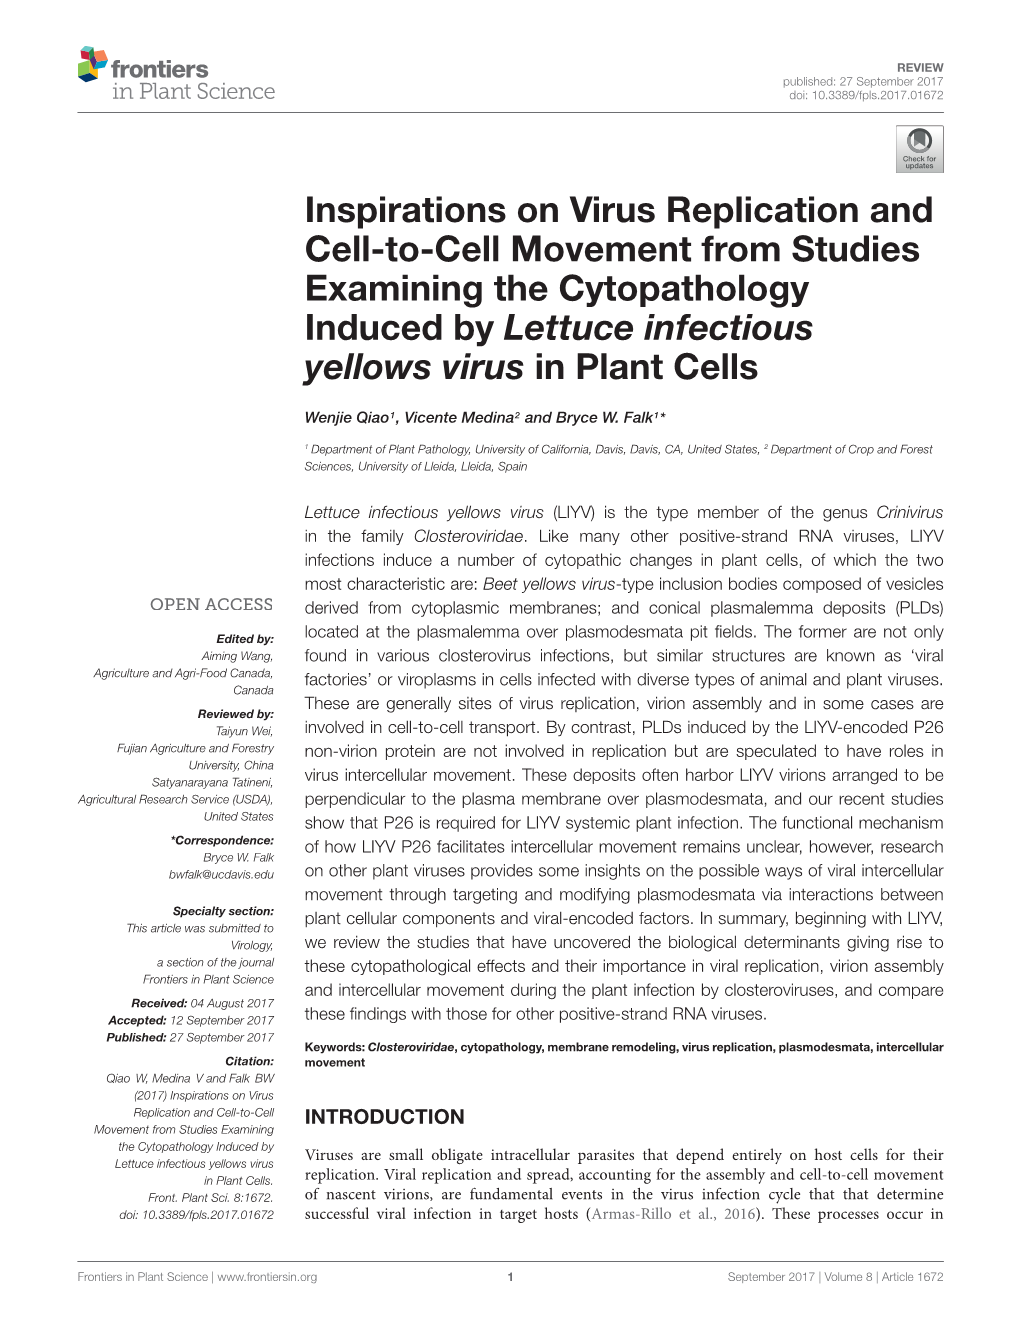 Inspirations on Virus Replication and Cell-To-Cell Movement from Studies Examining the Cytopathology Induced by Lettuce Infectious Yellows Virus in Plant Cells